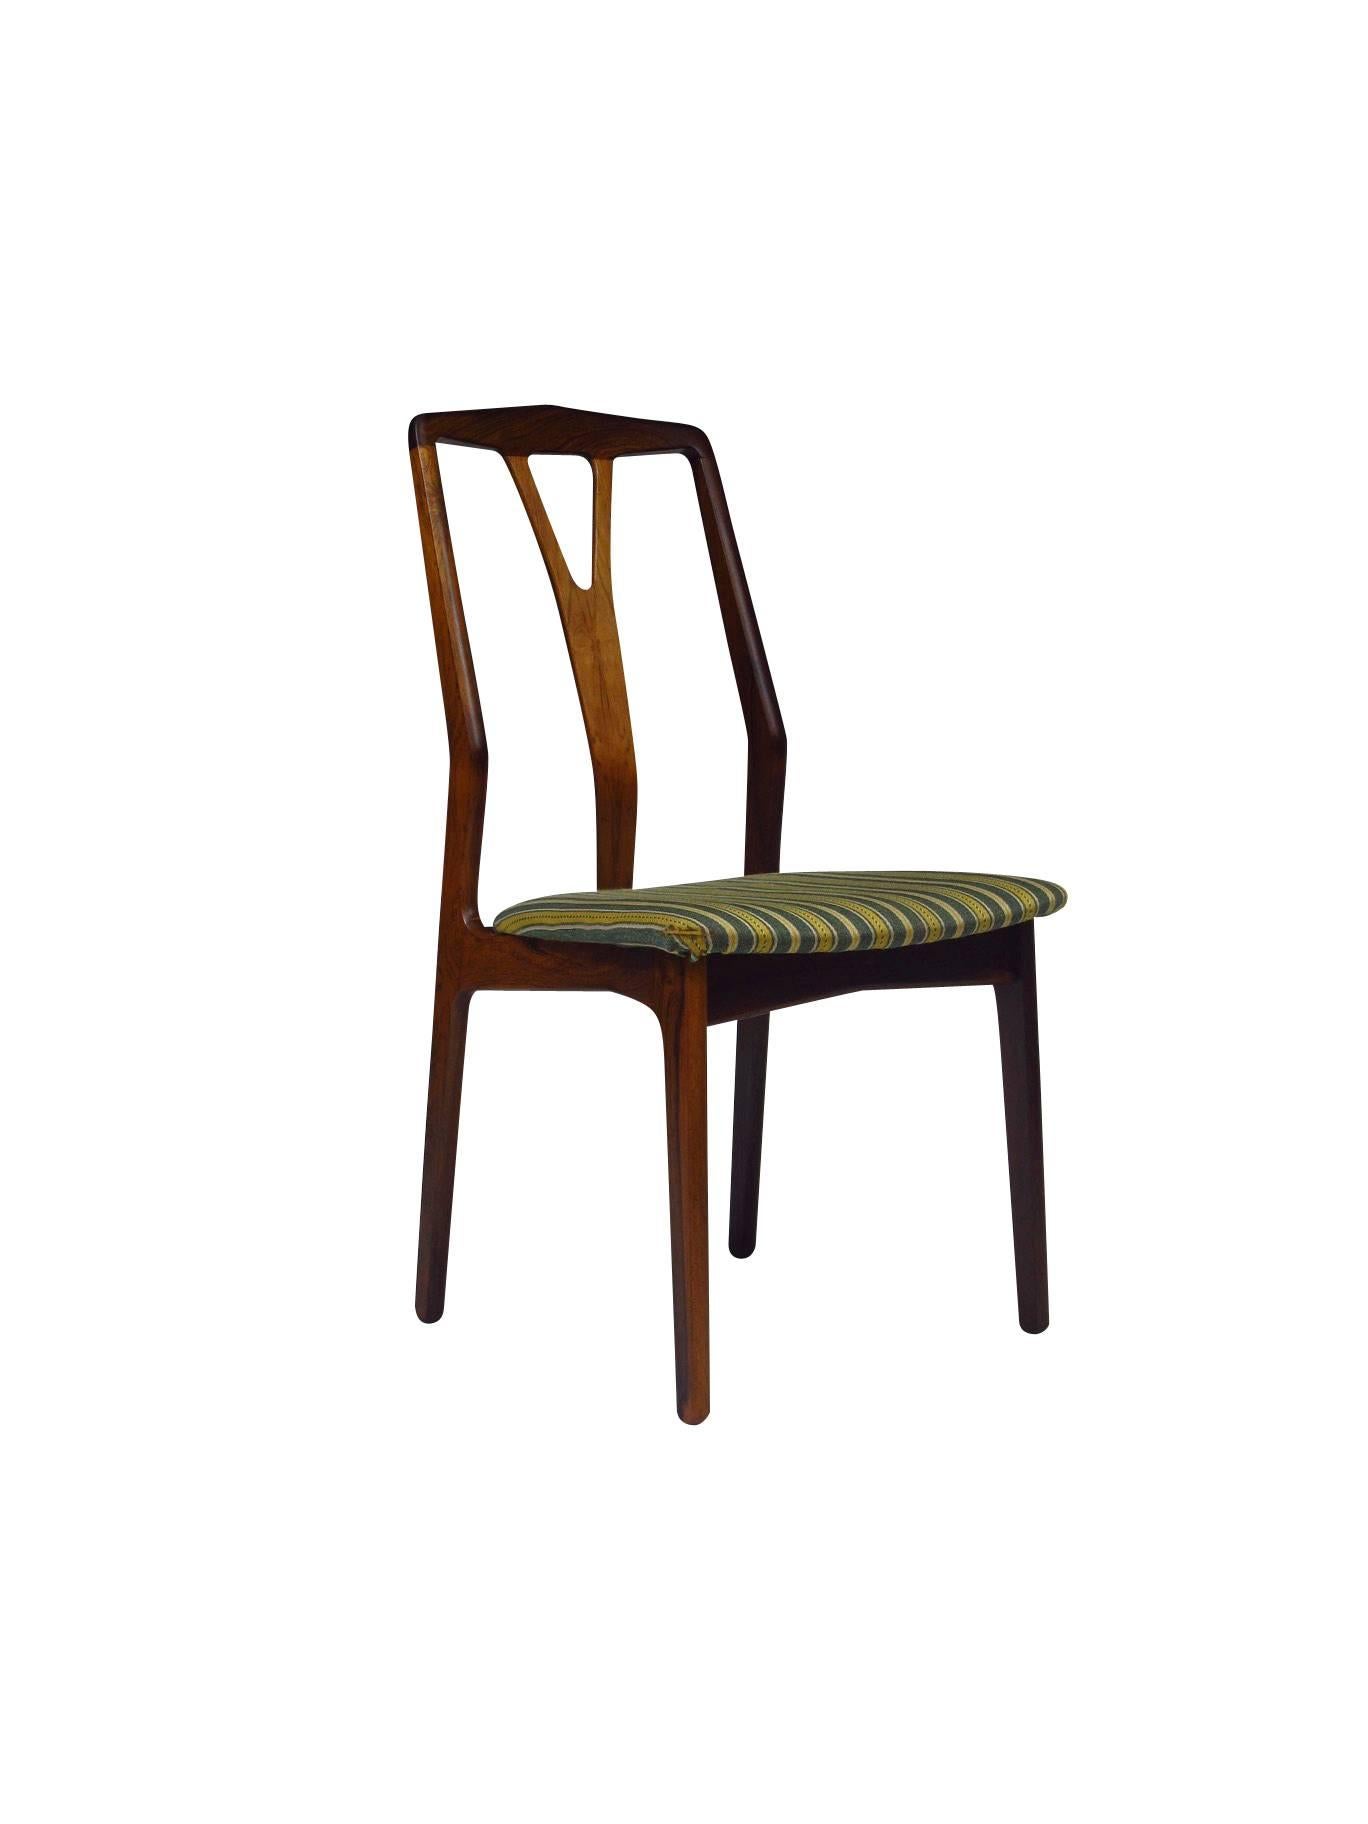 Six Danish rosewood dining chairs with dynamic grained rosewood and hand sculpted wishbone style backs. Original wool upholstered seats can be customized in any fabric or leather of choice.